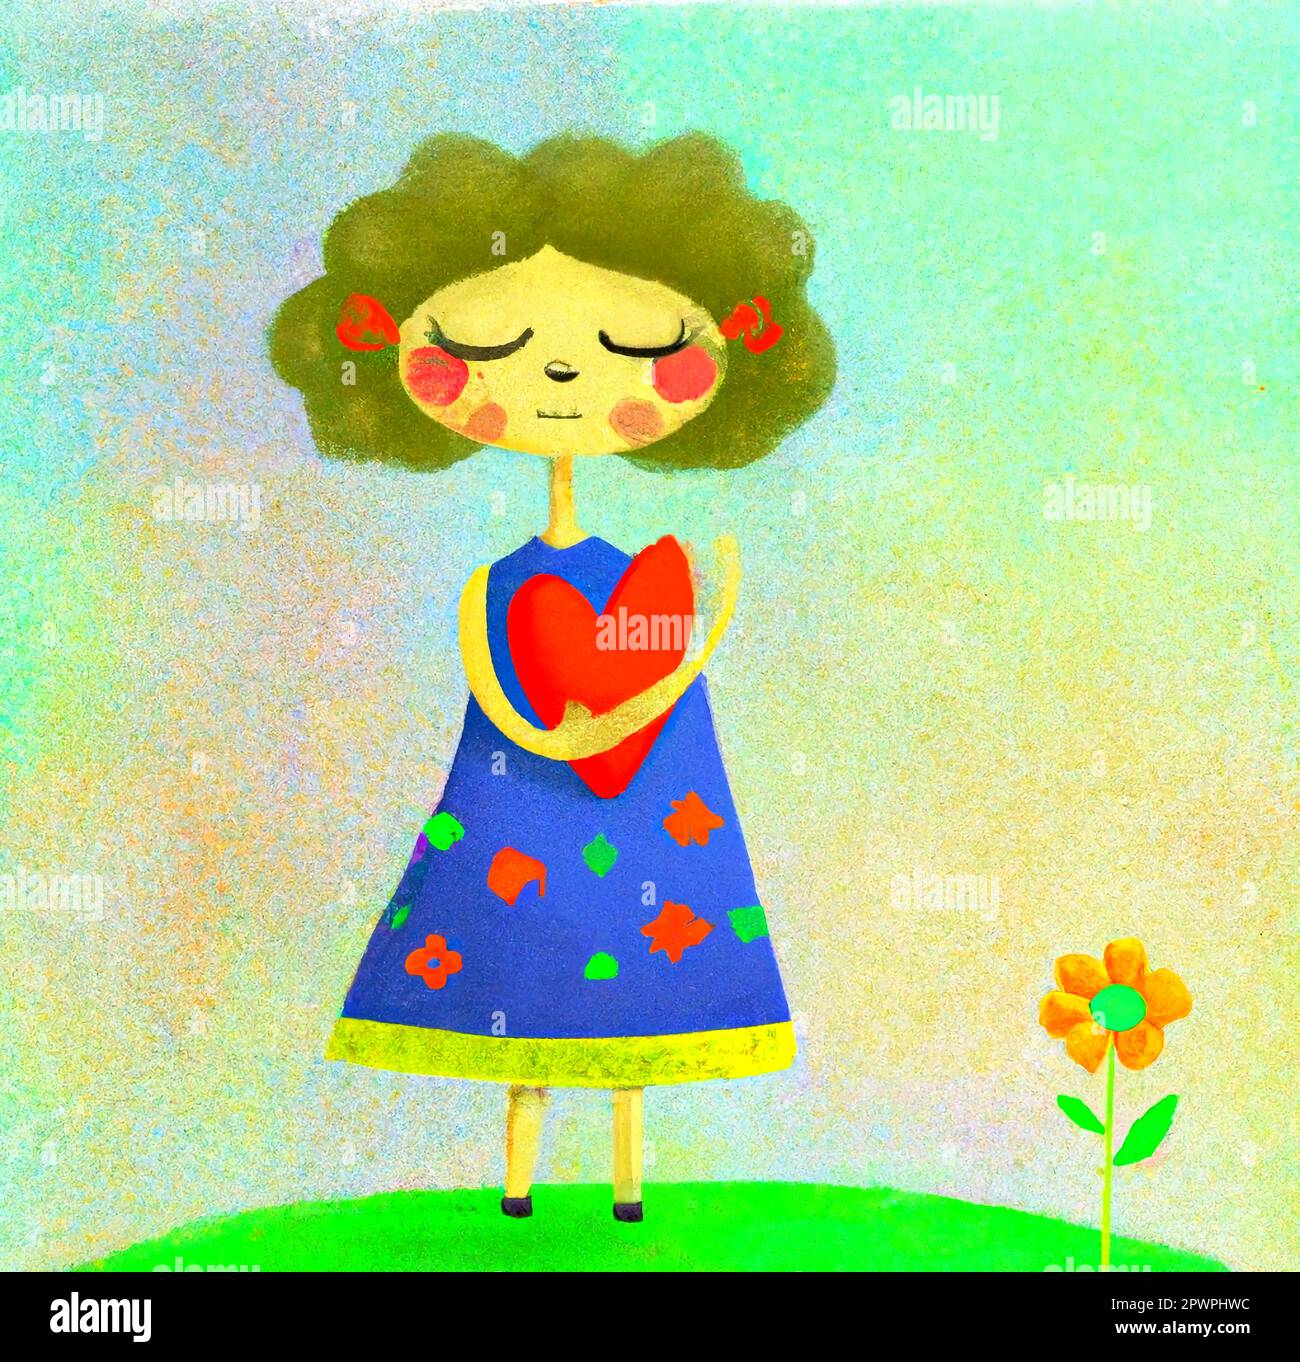 https://c8.alamy.com/comp/2PWPHWC/childrens-drawing-of-a-dreamy-little-girl-holding-a-red-heart-in-a-meadow-with-a-flower-2PWPHWC.jpg